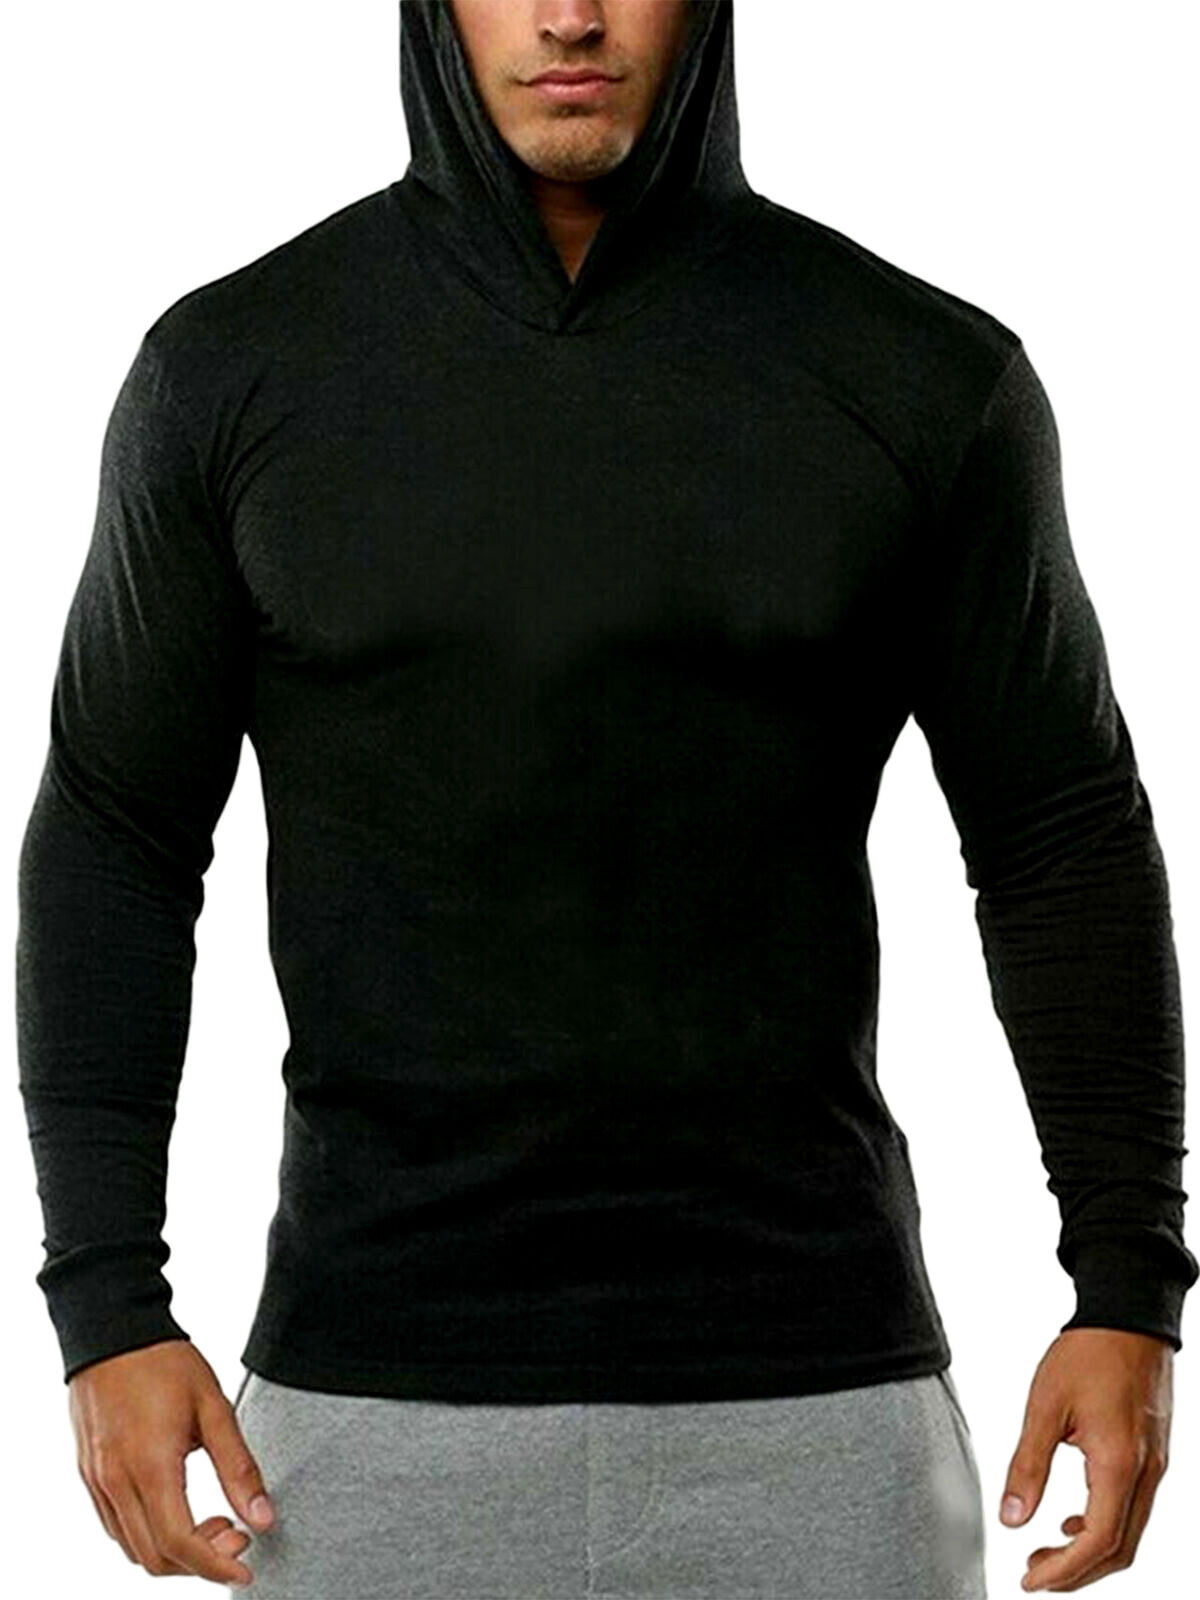 Men Muscle Basic Fit Hoodies Pullover Gym Long Sleeve Athletic Light ...